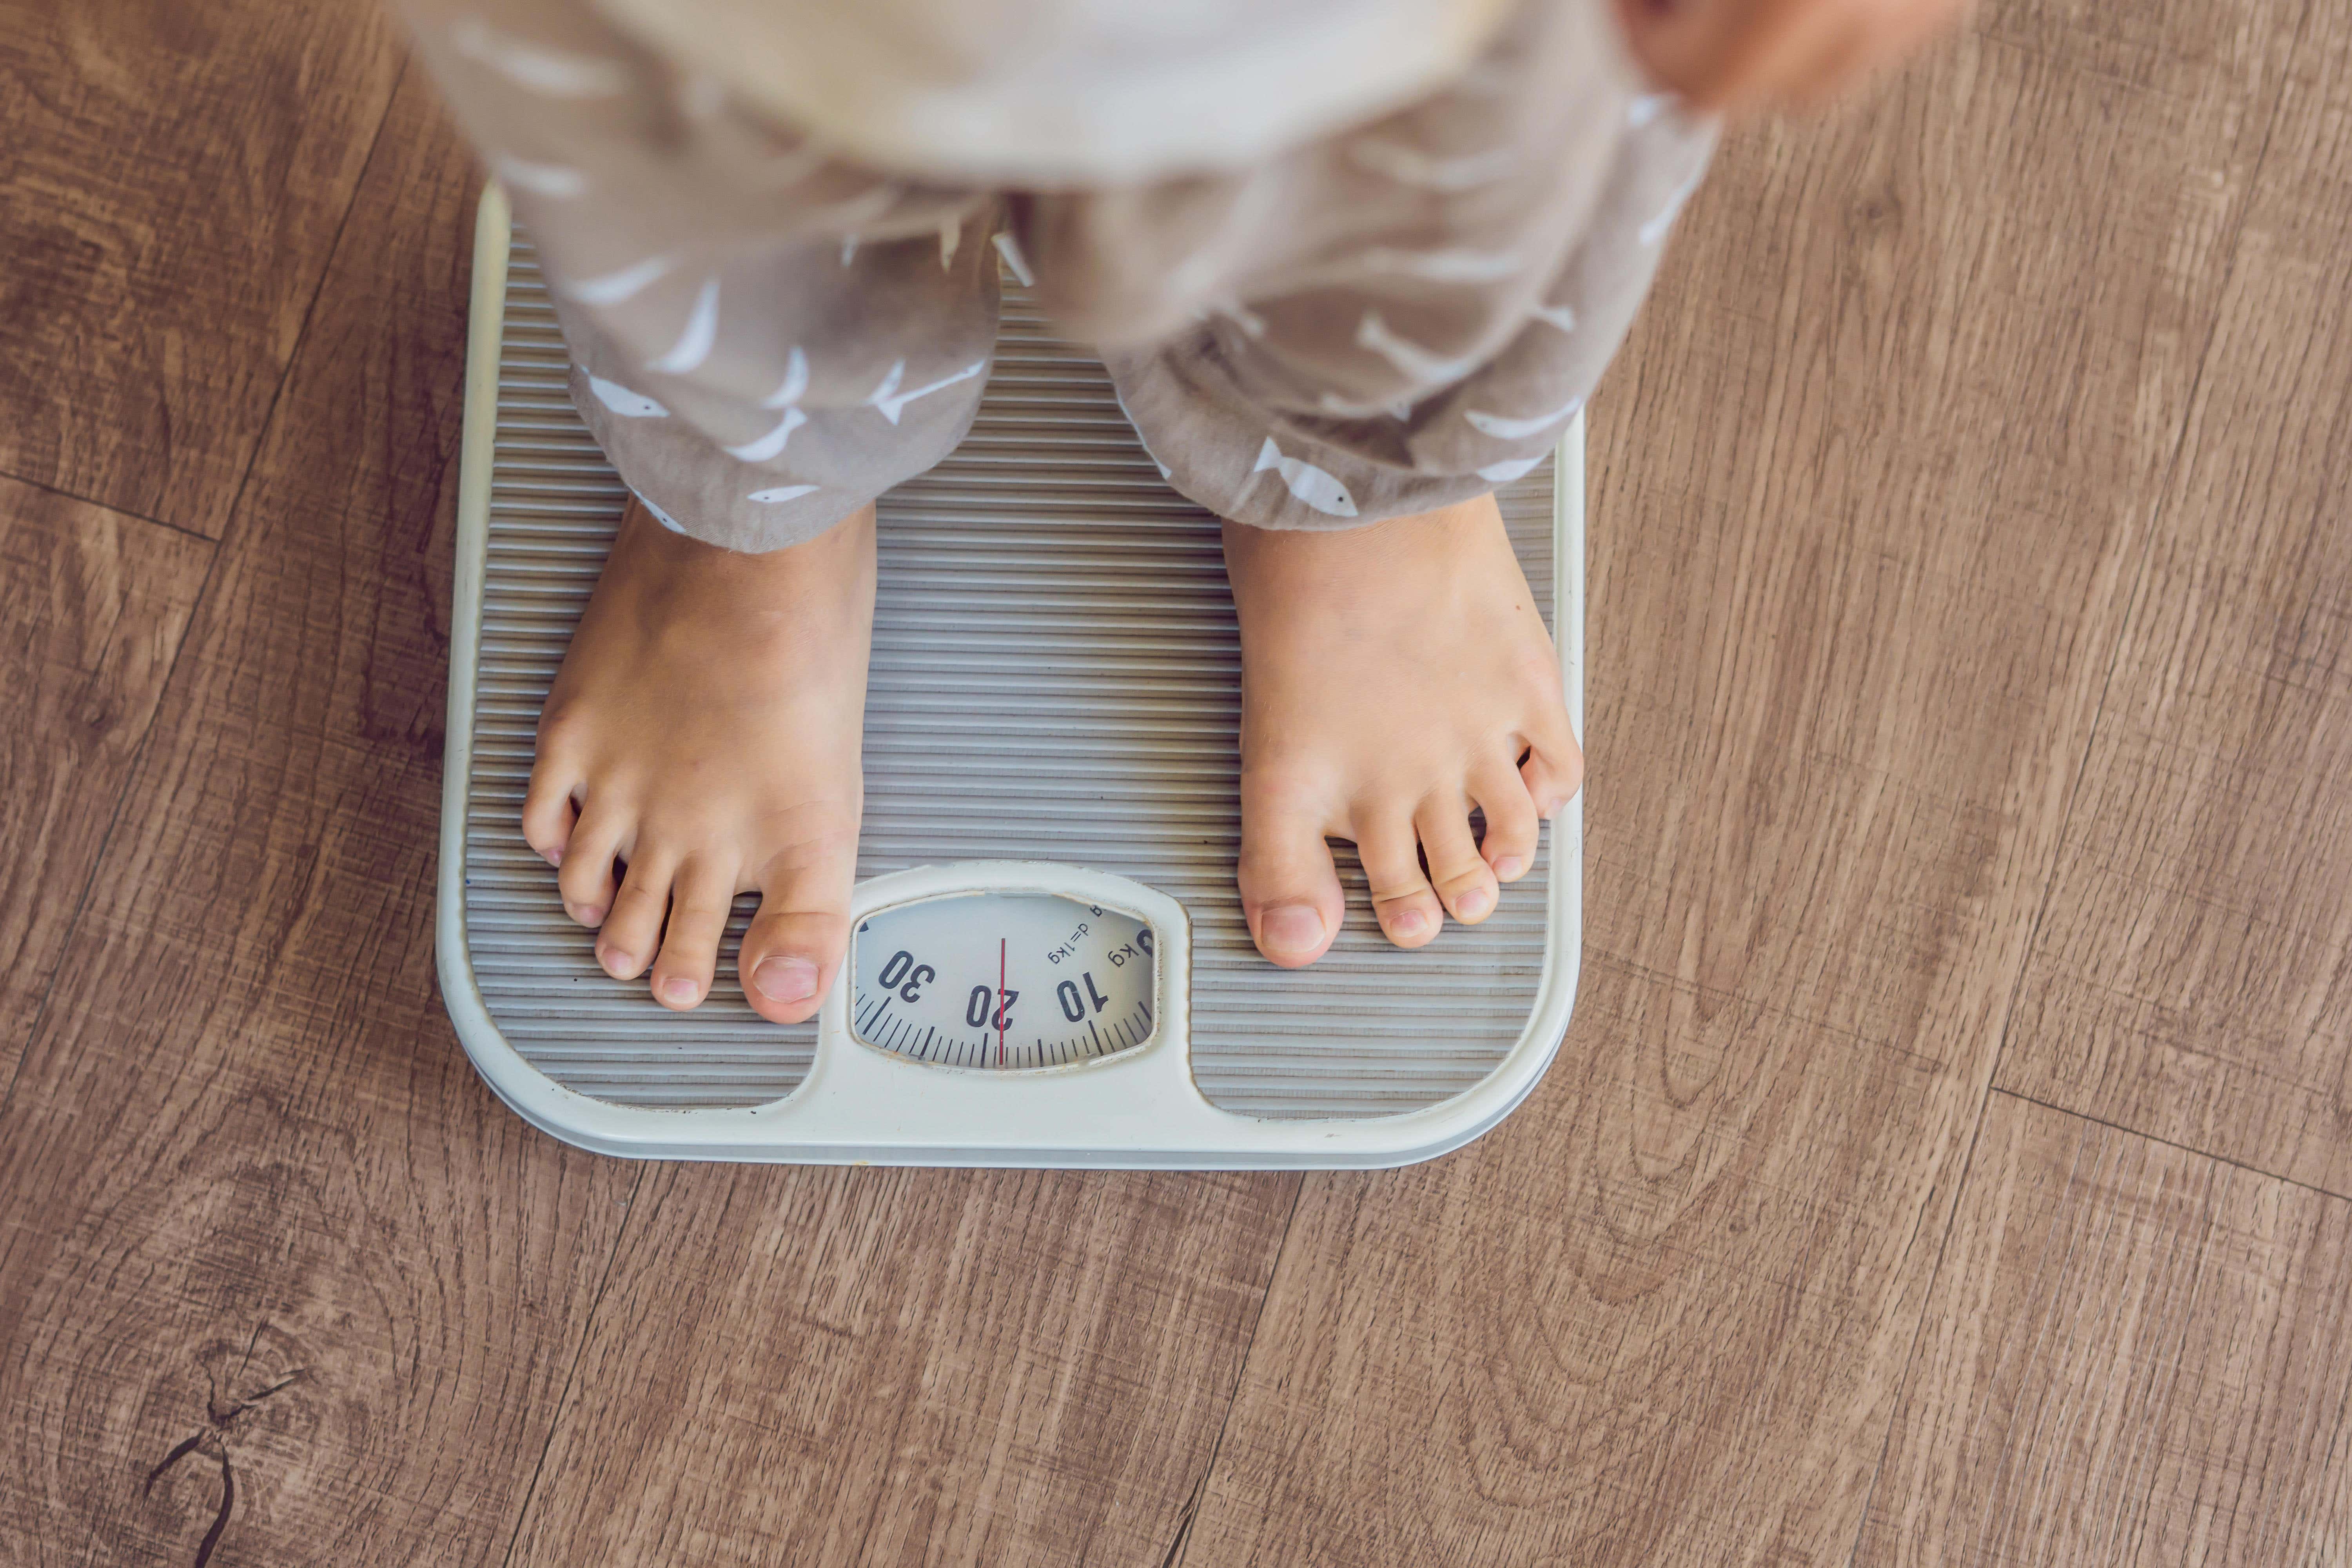 Diets can be the start of eating disorders